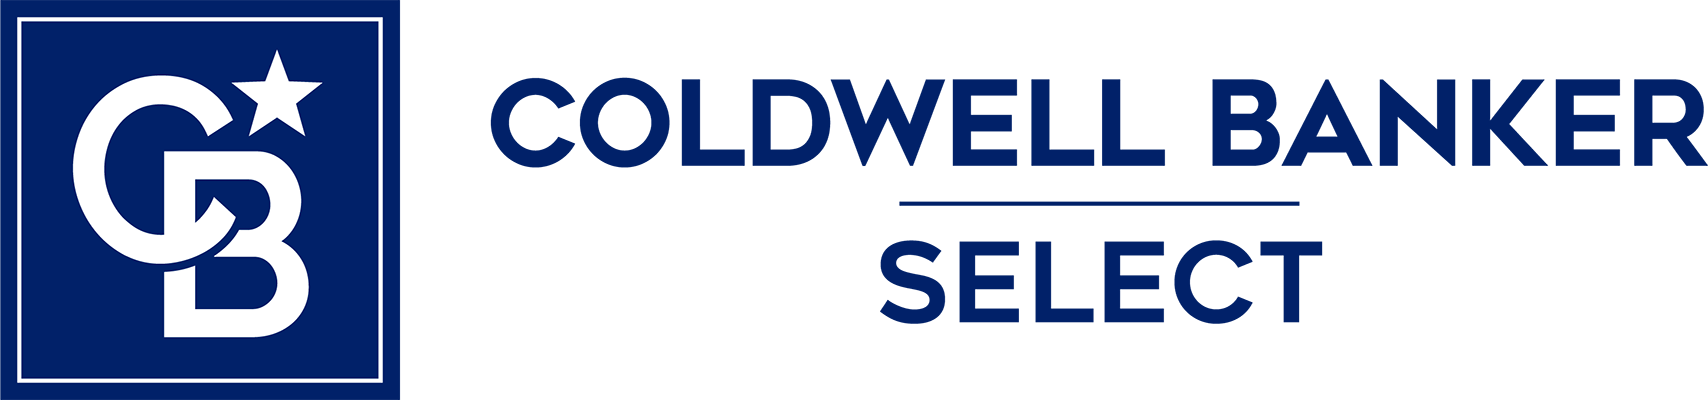 Jessica Wilbourn - Coldwell Banker Select Logo